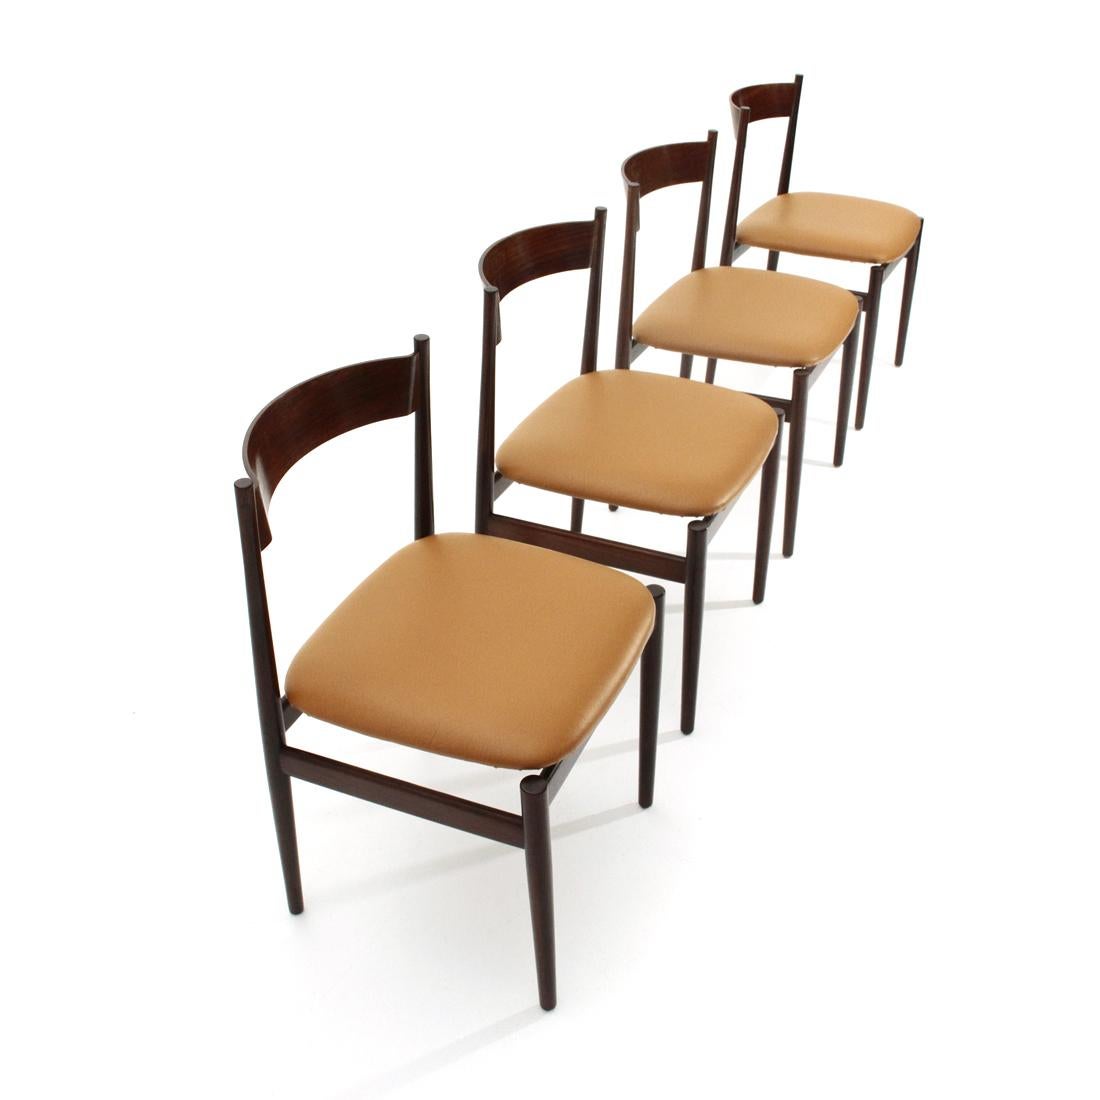 Italian 4 '107' Chairs by Gianfranco Frattini for Cassina, 1960s For Sale